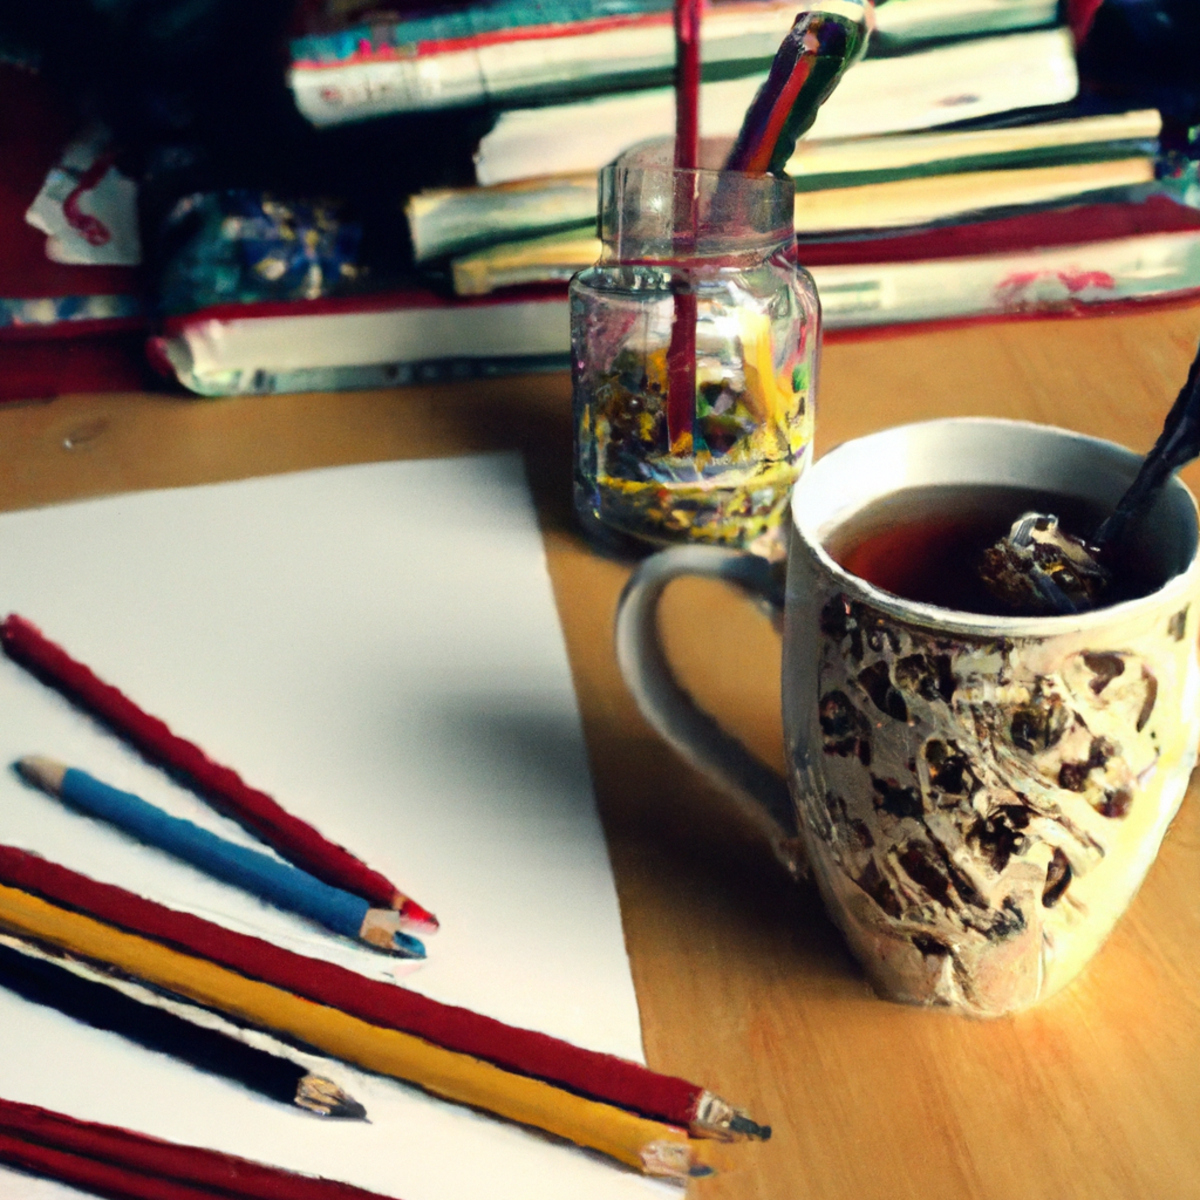 Coloring book, pencils, tea, and plant create a relaxing and creative stress management environment.